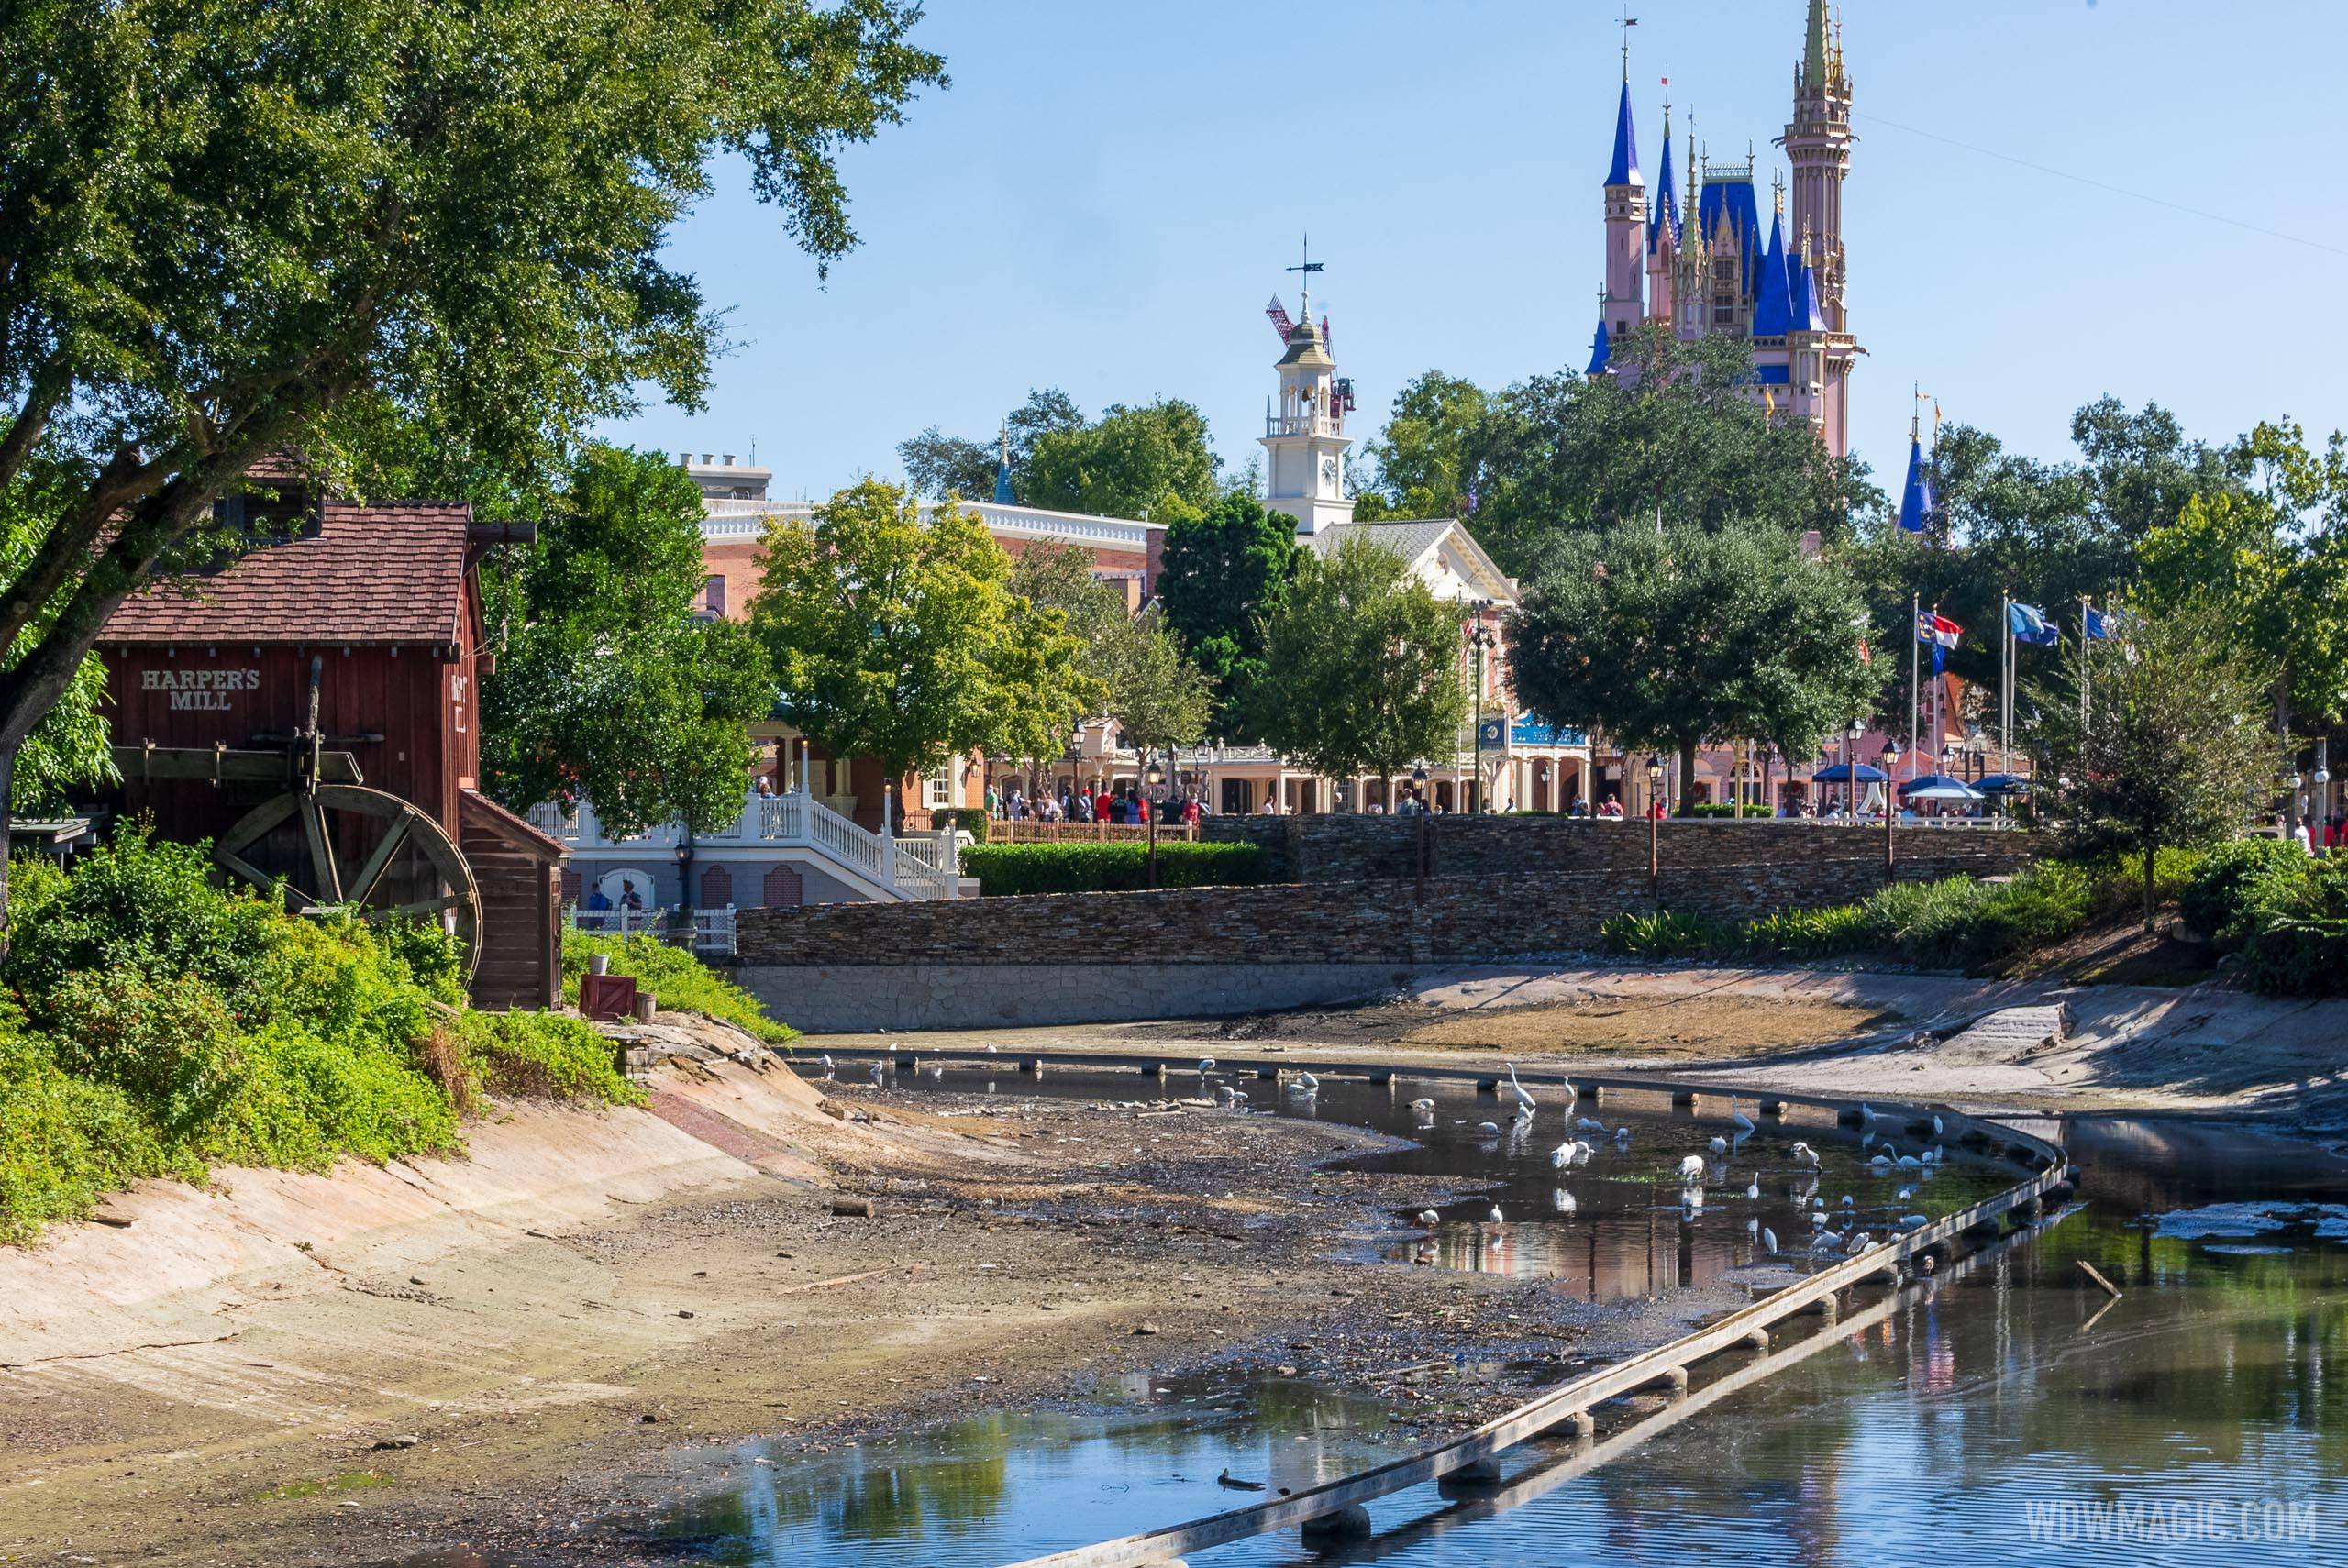 Rivers of America drained - November 2 2020